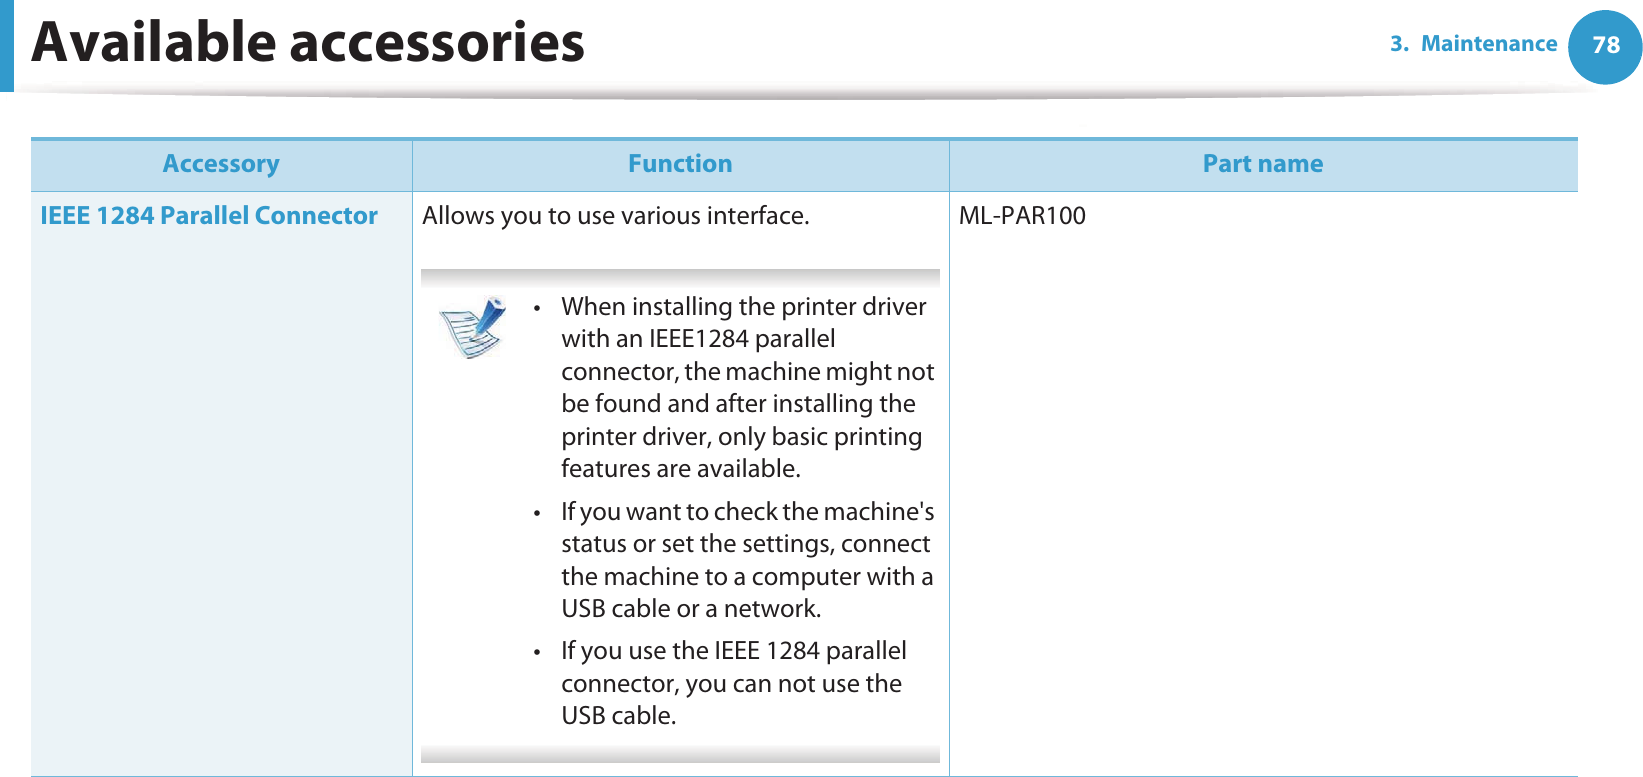 Available accessories 783. Maintenance IEEE 1284 Parallel Connector Allows you to use various interface. • When installing the printer driver with an IEEE1284 parallel connector, the machine might not be found and after installing the printer driver, only basic printing features are available.• If you want to check the machine&apos;s status or set the settings, connect the machine to a computer with a USB cable or a network.• If you use the IEEE 1284 parallel connector, you can not use the USB cable. ML-PAR100Accessory Function Part name